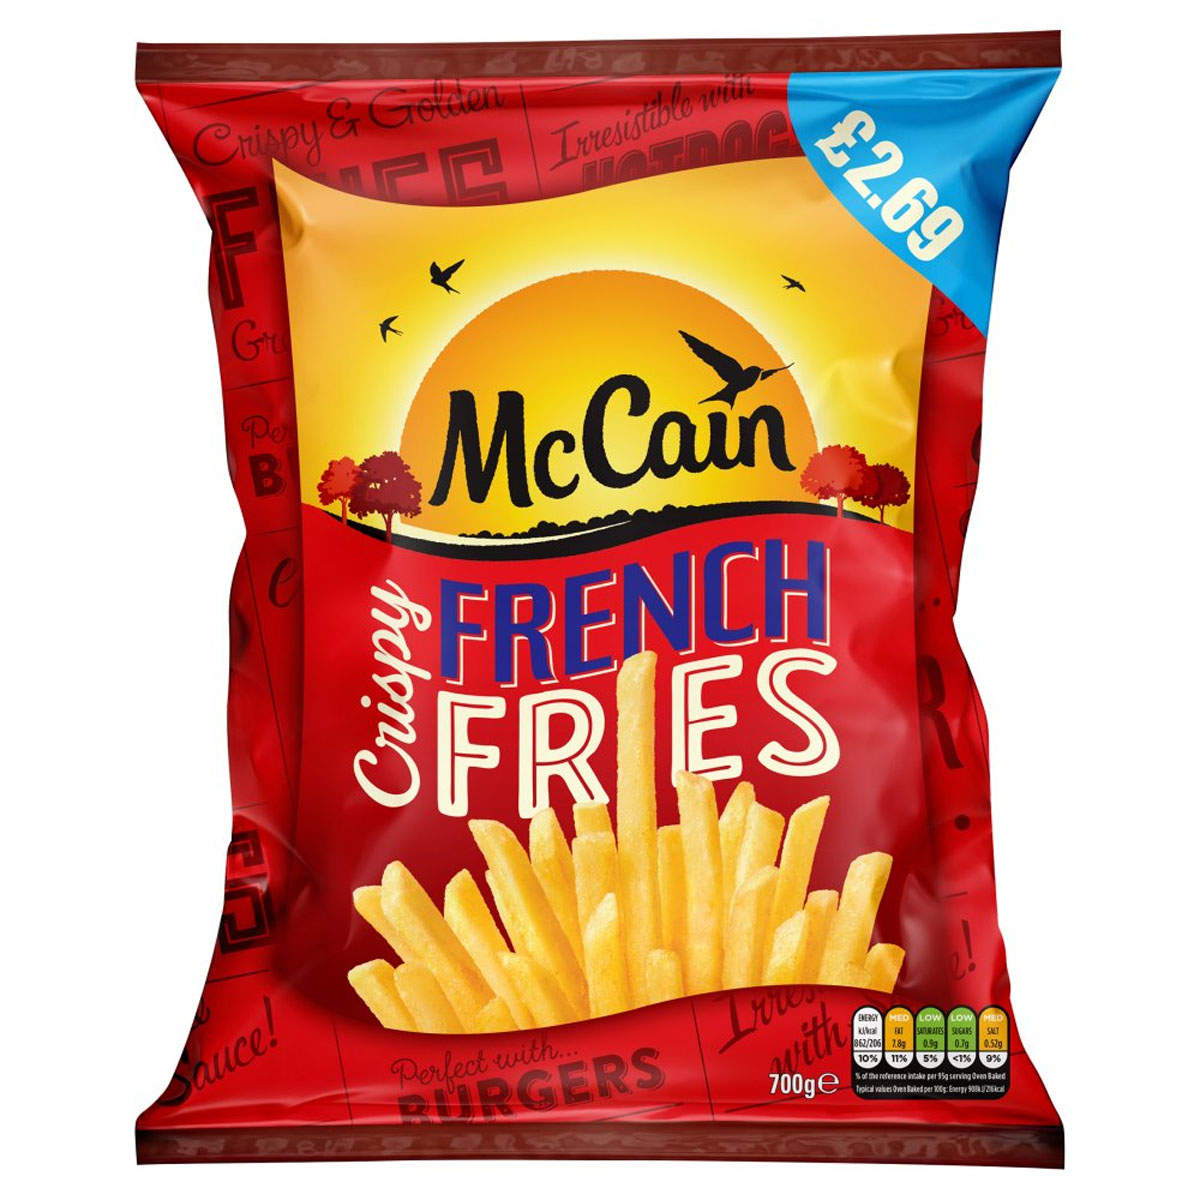 A bag of McCain - Crispy French Fries - 700g on a white background.